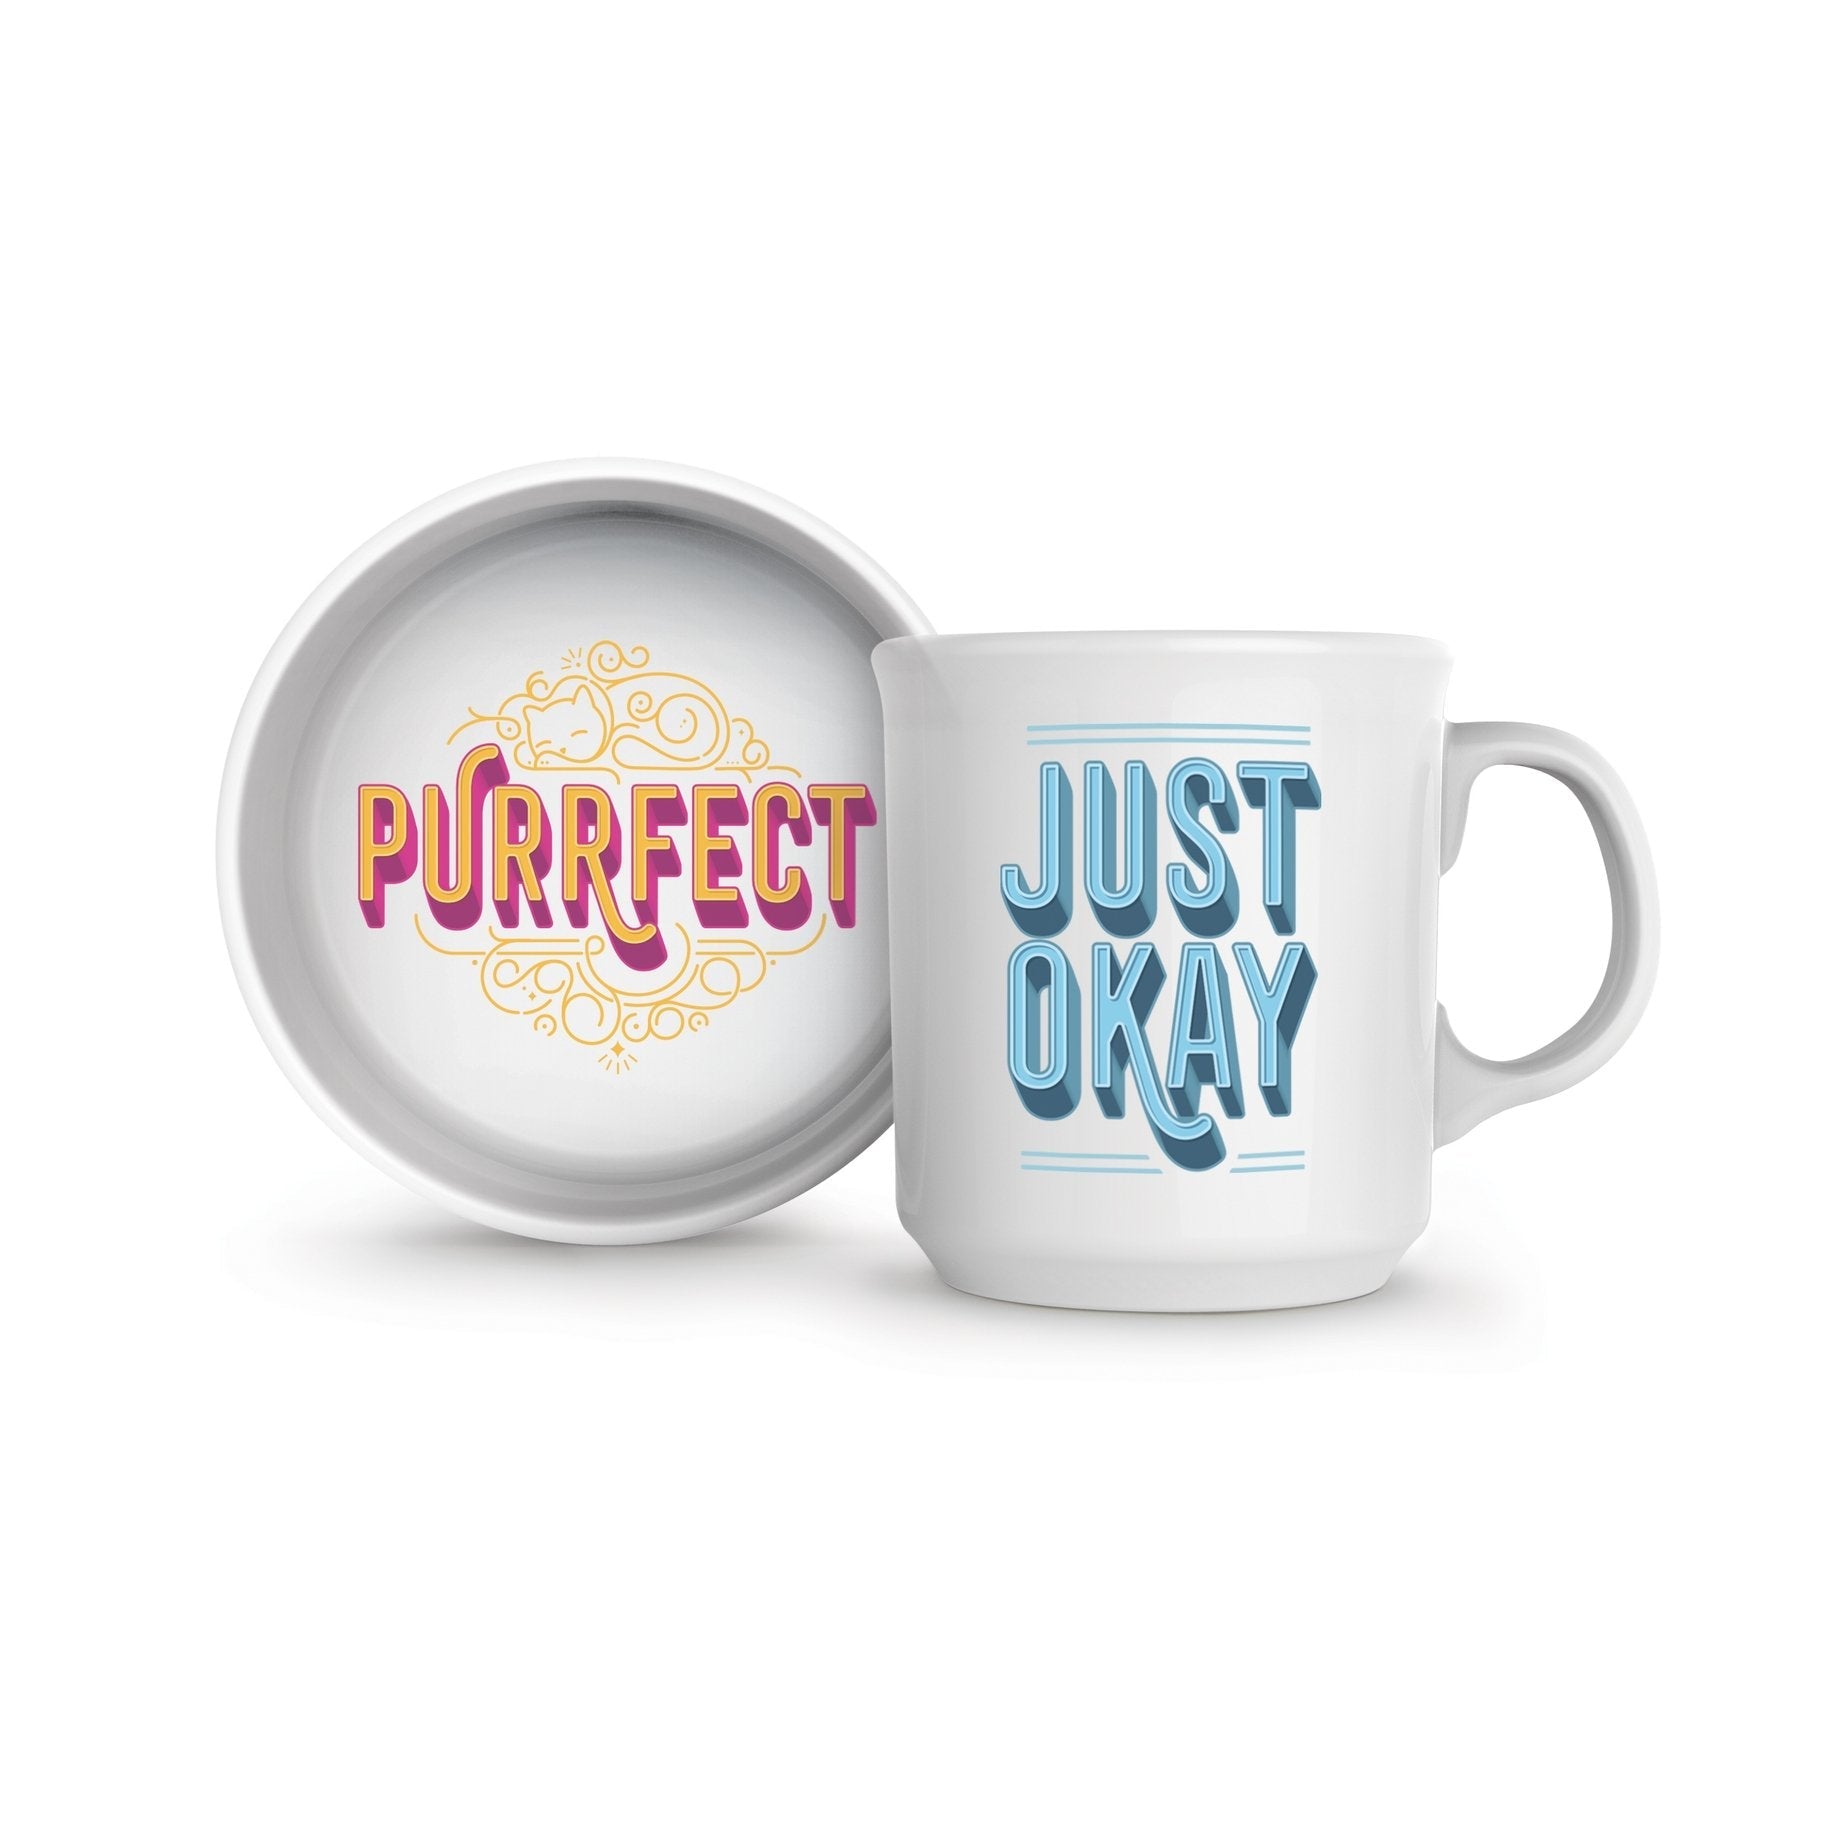 Funny Cat Themed Gifts, "Just Okay" Cat Lover Coffee Mug With The Words "Just Okay" And "Purrfect" Cat Food Bowl